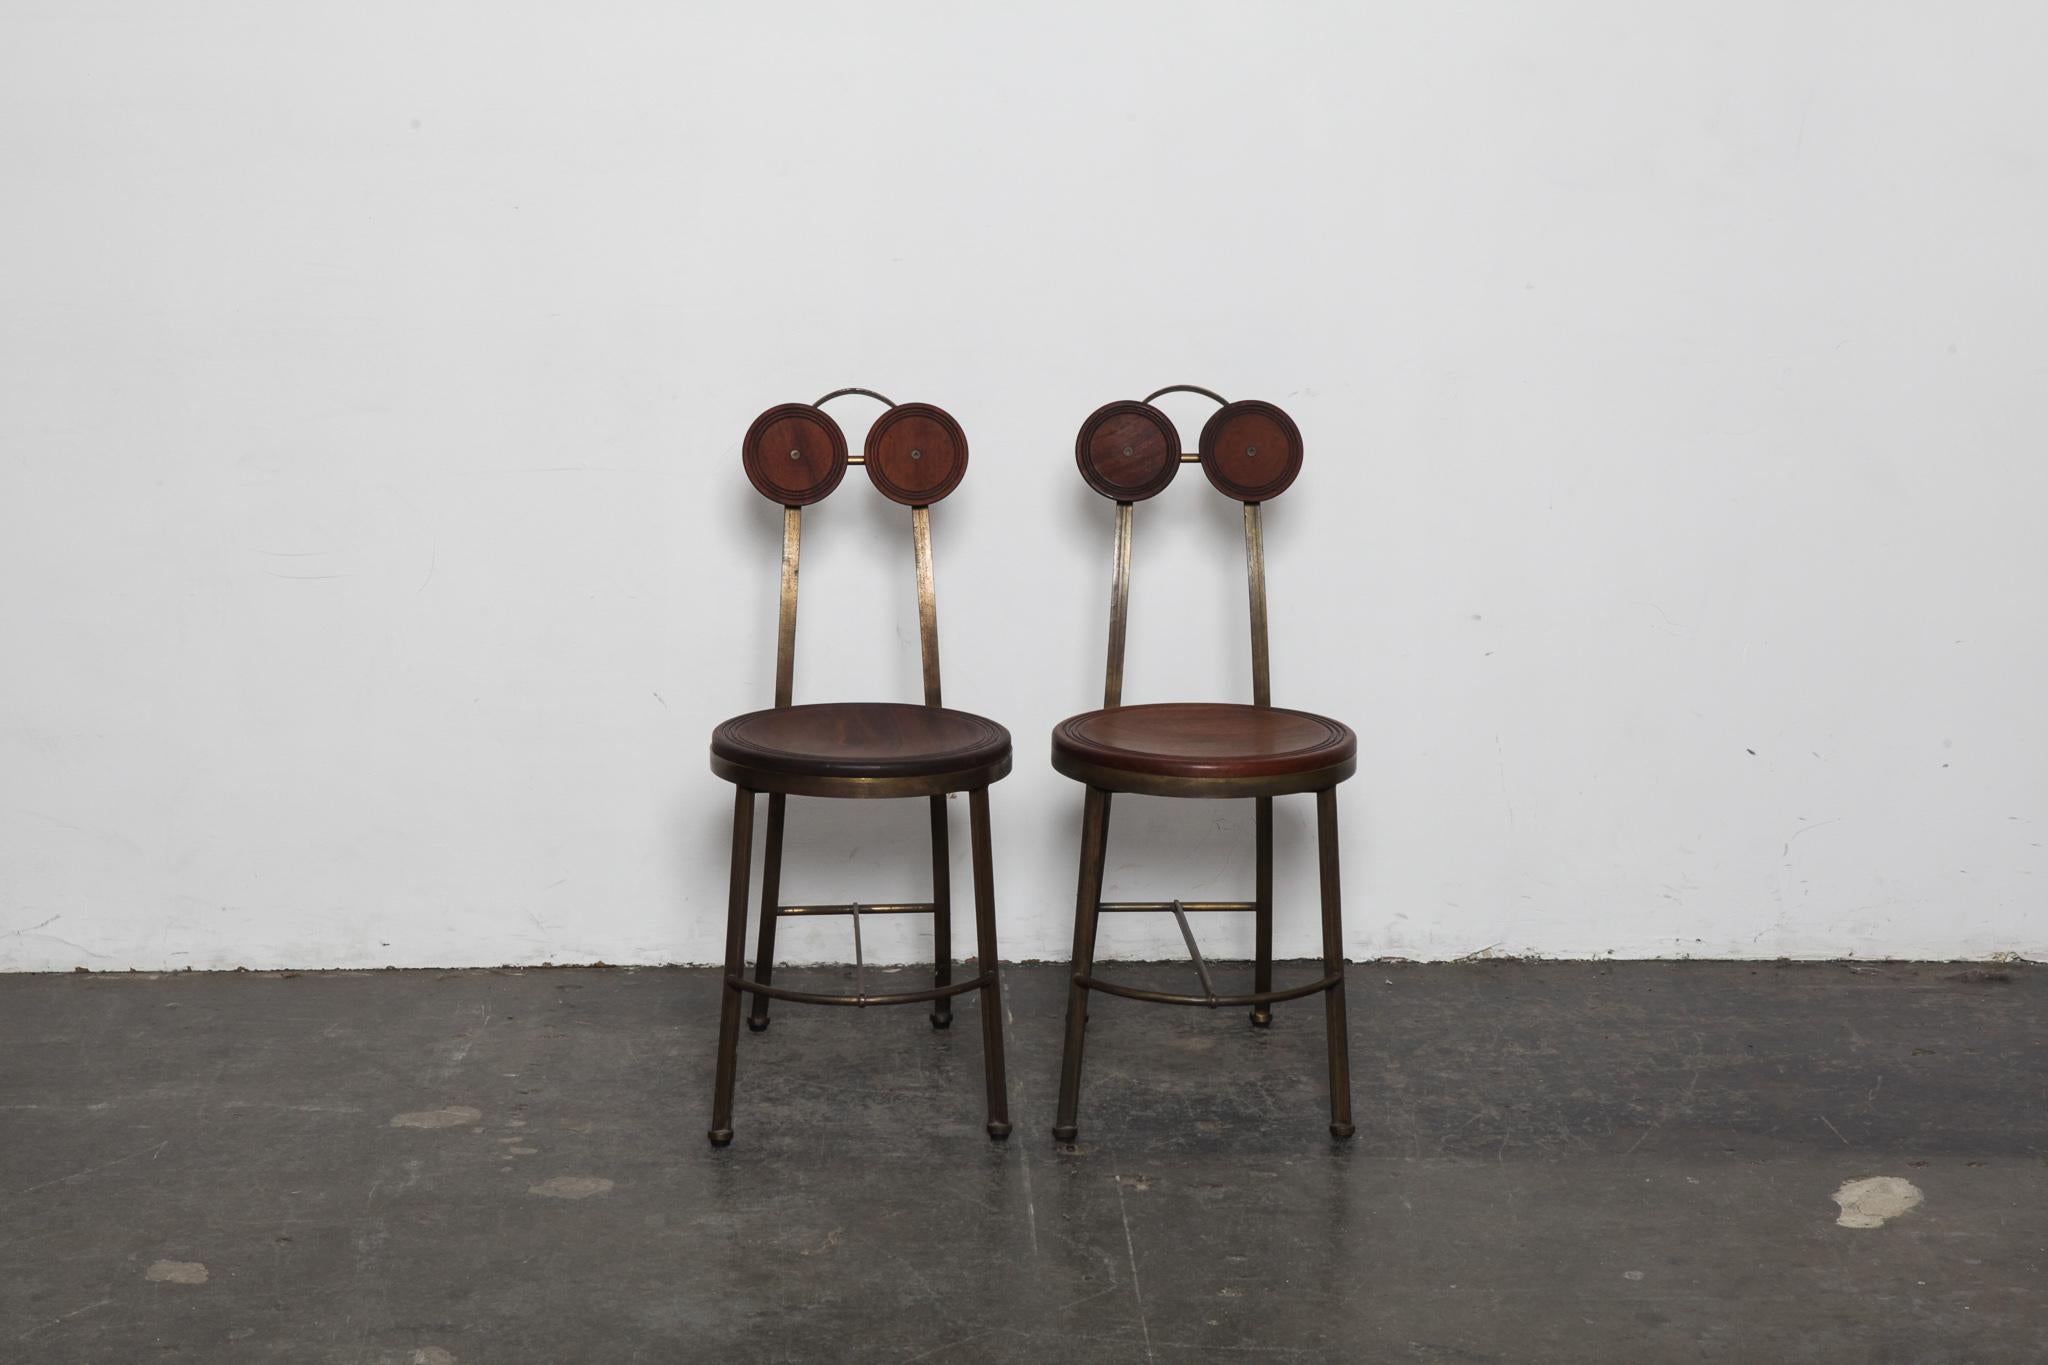 Pair of rare solid solid bronze and Freijo wood side chairs, made in Brazil by designer Pedro Useche. Very unique chairs with solid wood dual circles for the back support and a large solid wood round seat. Frames are very heavy for their size.